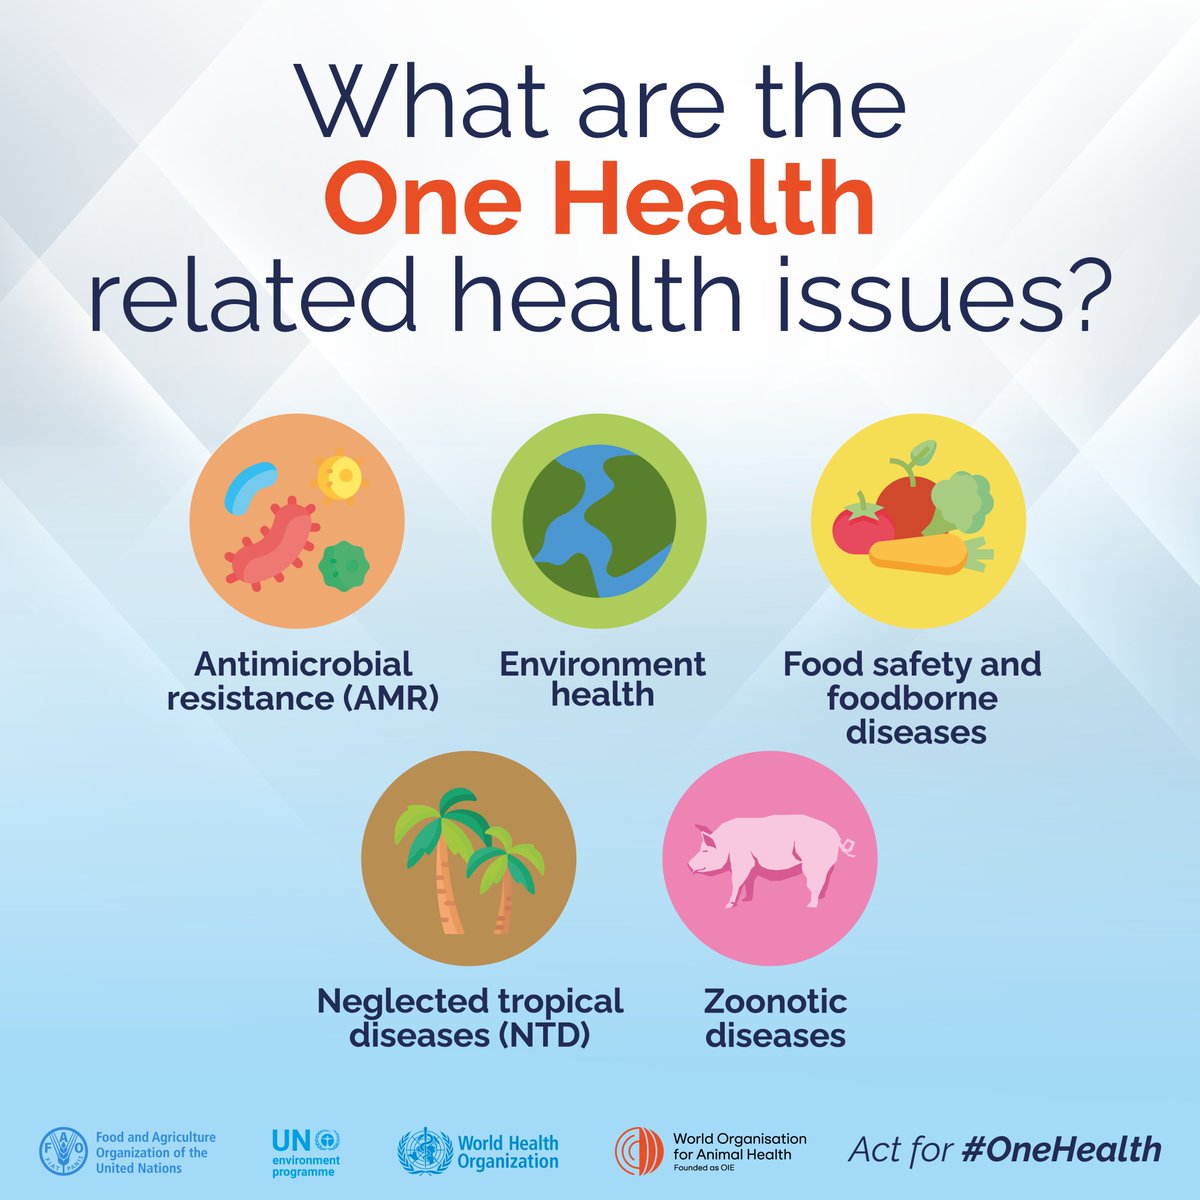 #OneHealth related health issues include: 🟢 Antimicrobial resistance 🟢 Environment health 🟢 Food safety 🟢 Neglected tropical diseases 🟢 Zoonotic diseases More info 👉bit.ly/40pVXRe